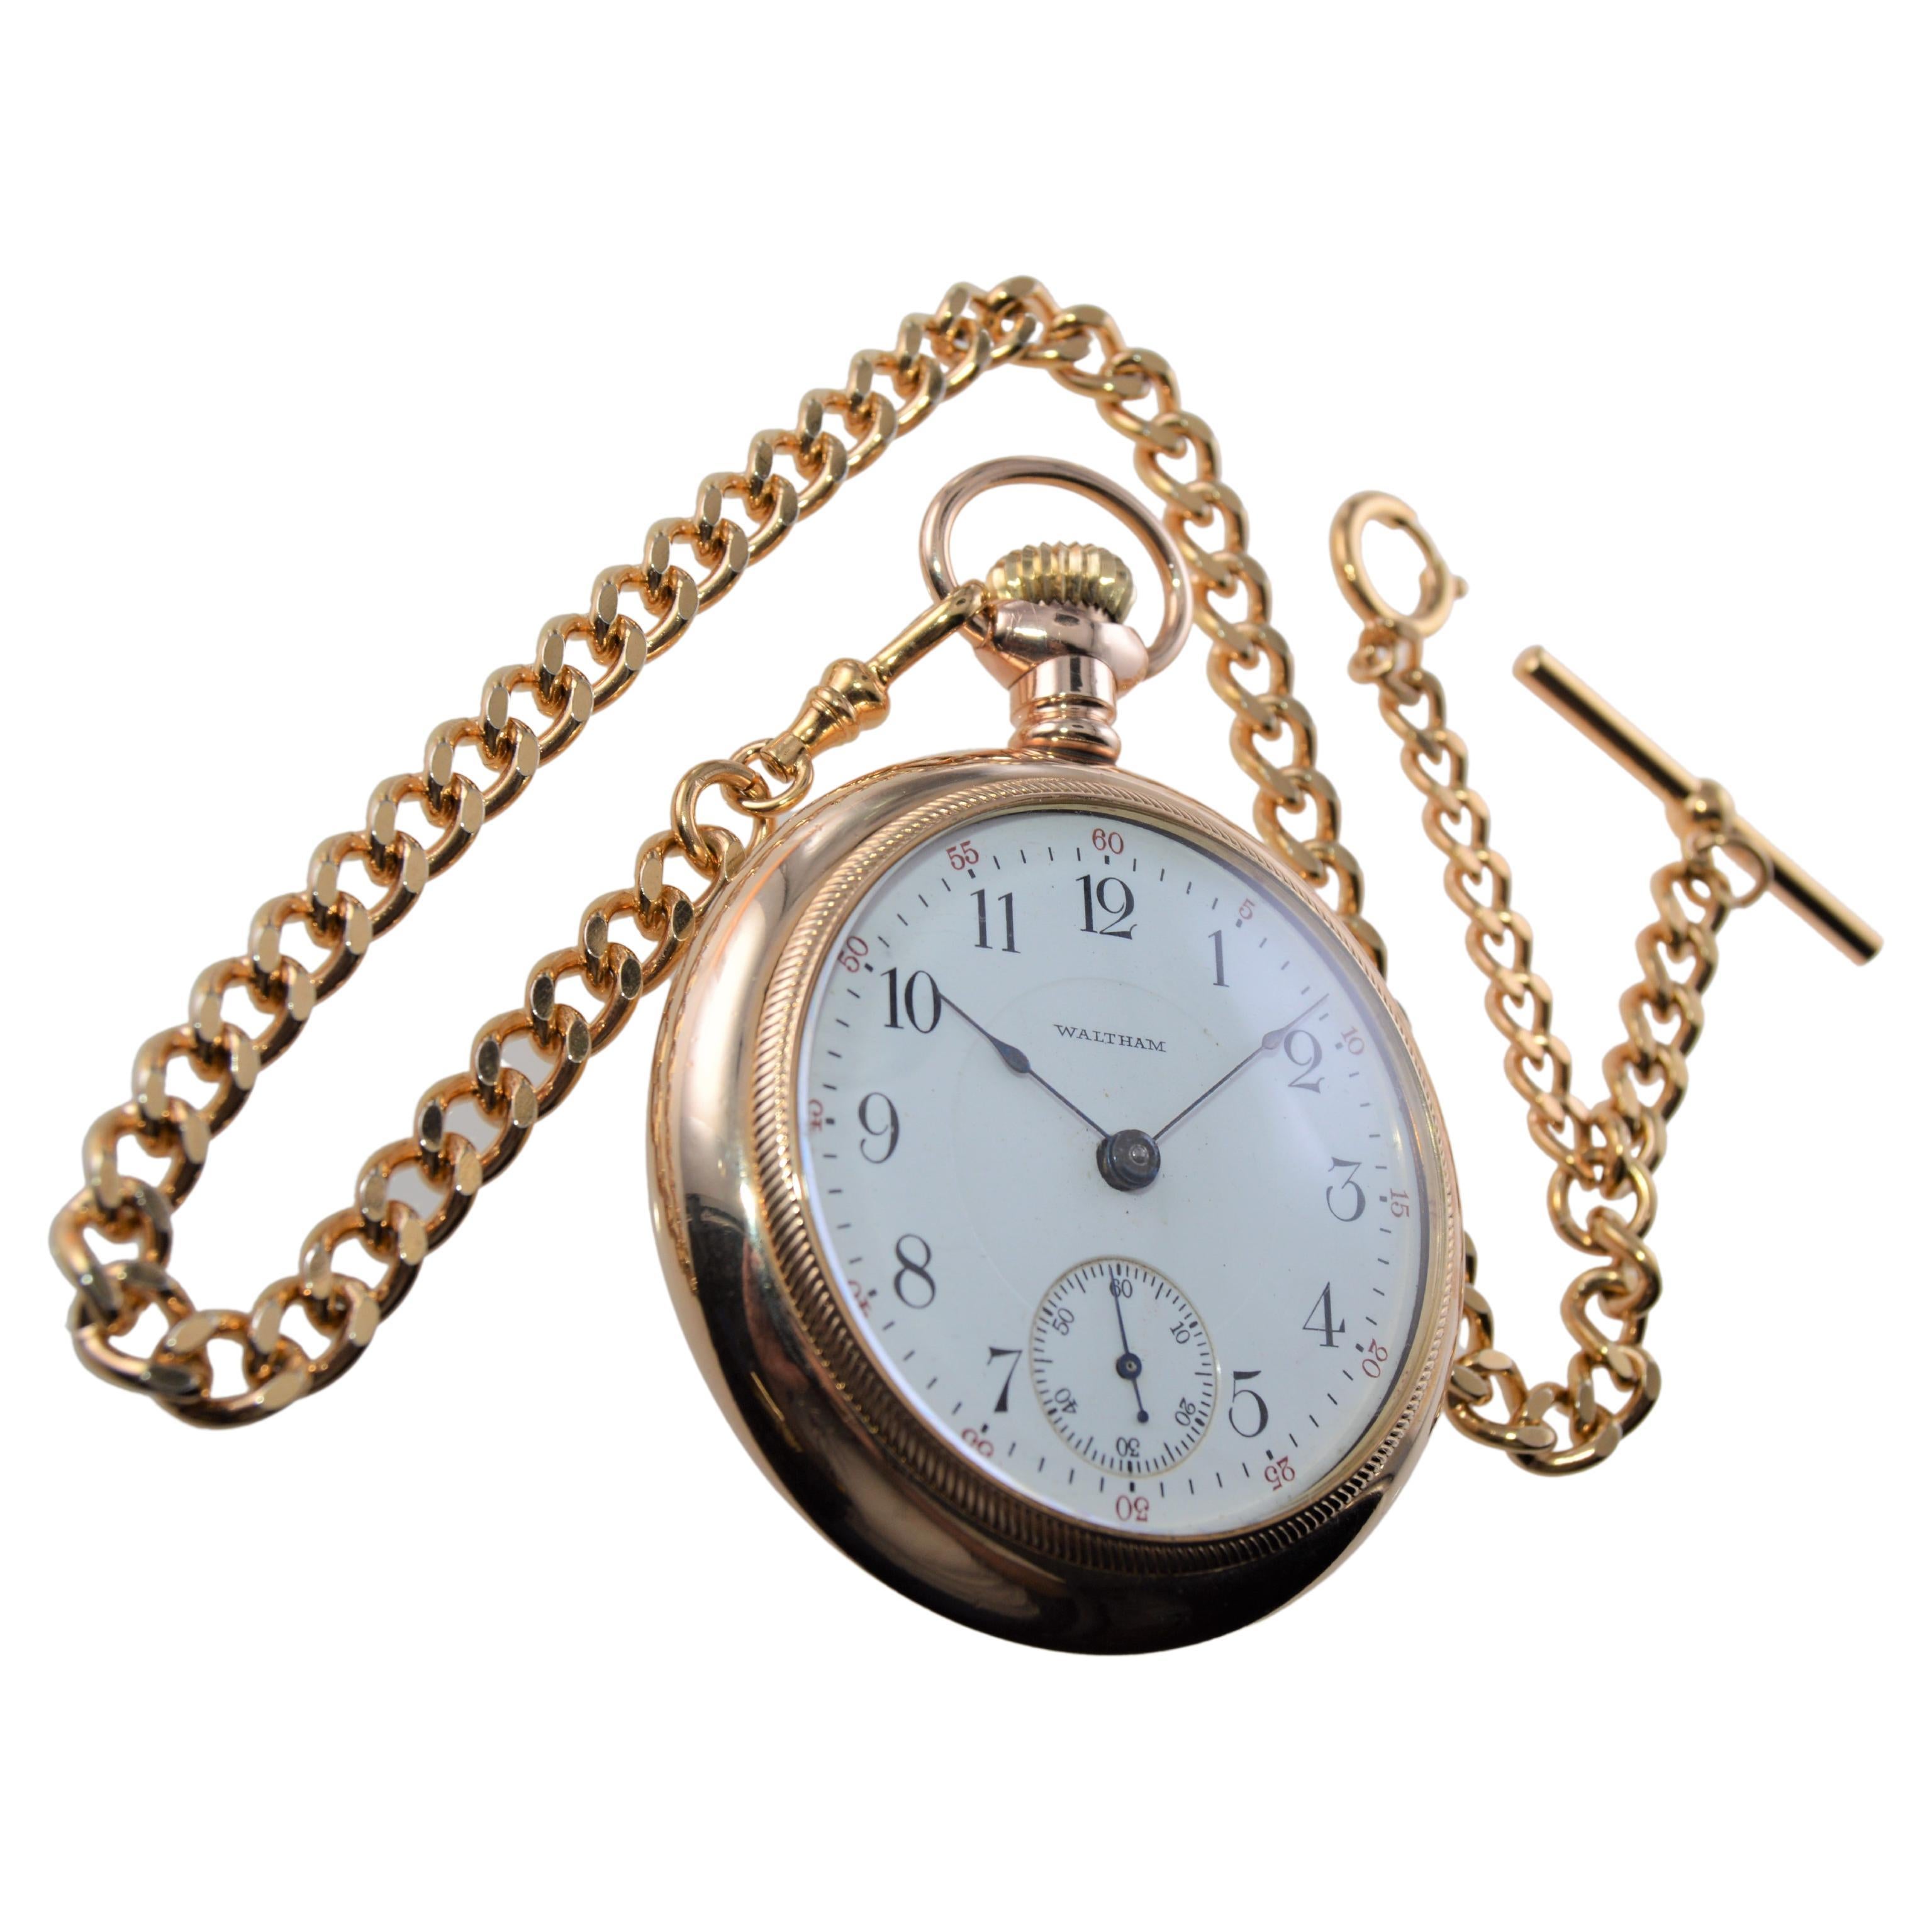 FACTORY / HOUSE: Waltham Watch Company
STYLE / REFERENCE: Open Faced Pocket Watch
METAL / MATERIAL: Yellow Gold Filled
CIRCA / YEAR: 1934
DIMENSIONS / SIZE: Diameter 15mm 
MOVEMENT / CALIBER: Manual Winding / 15 Jewels 
DIAL / HANDS: Kiln Fired